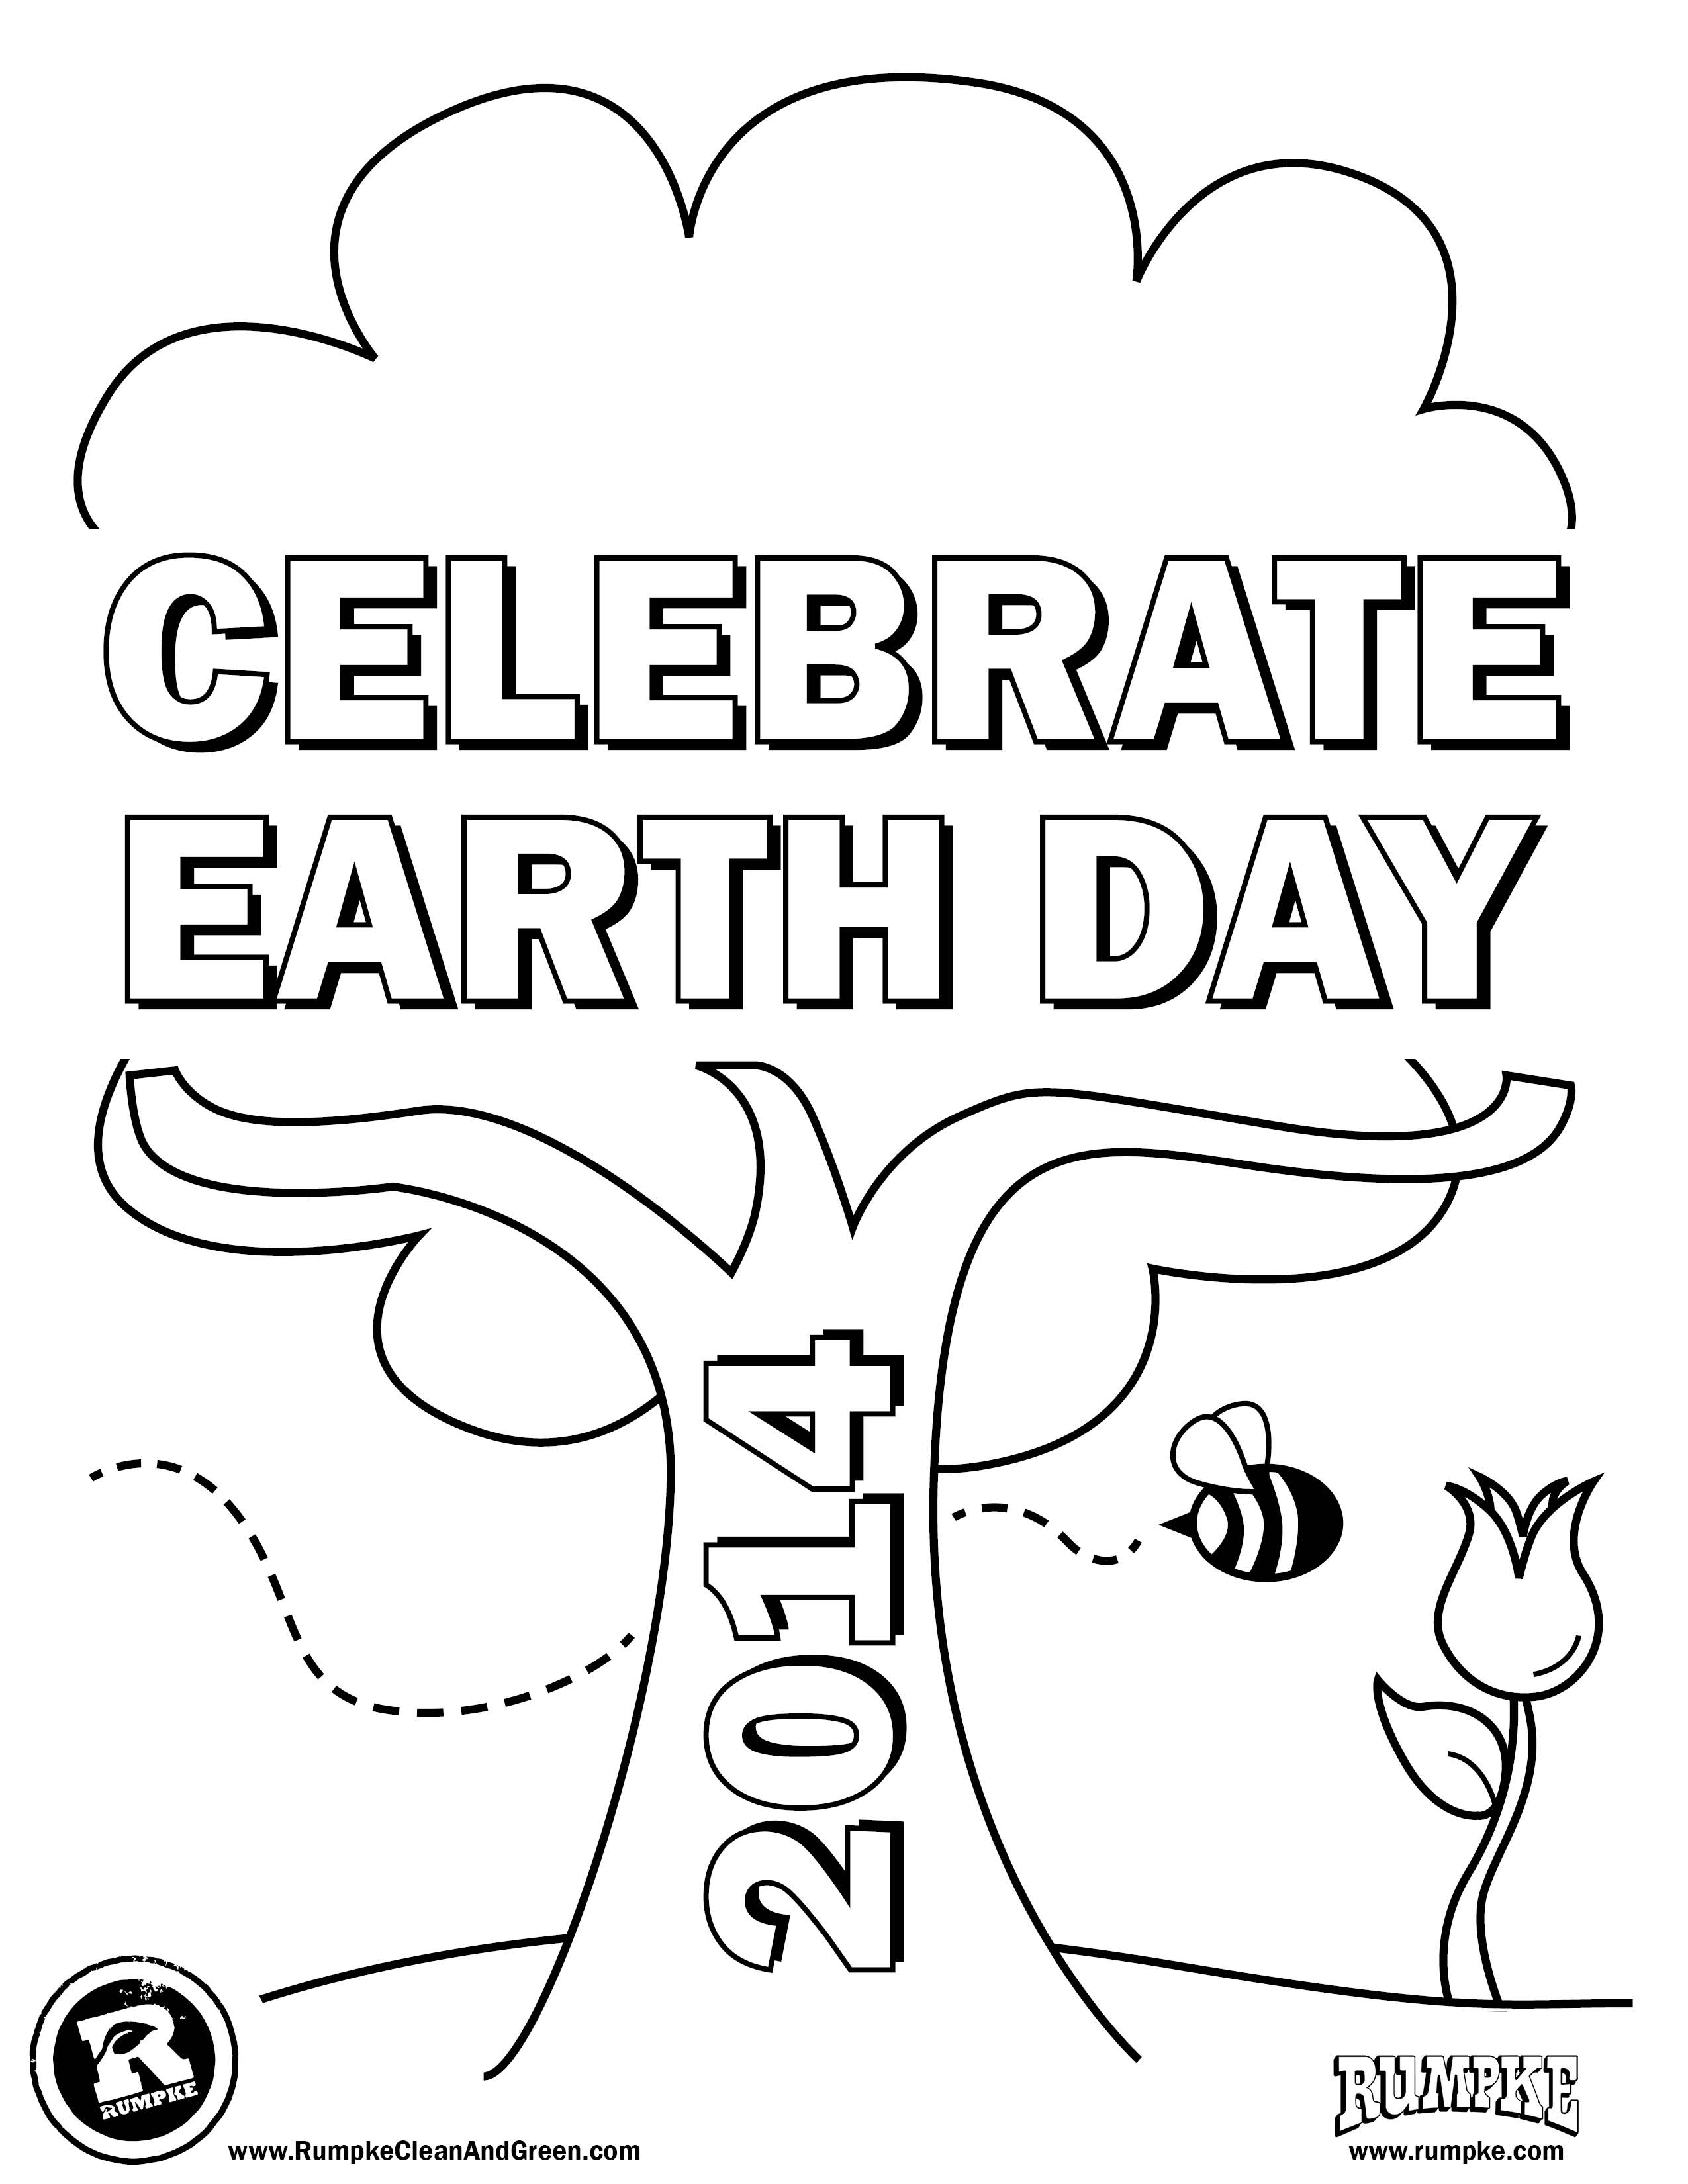 Kindergarten earth day coloring pages download and print for free